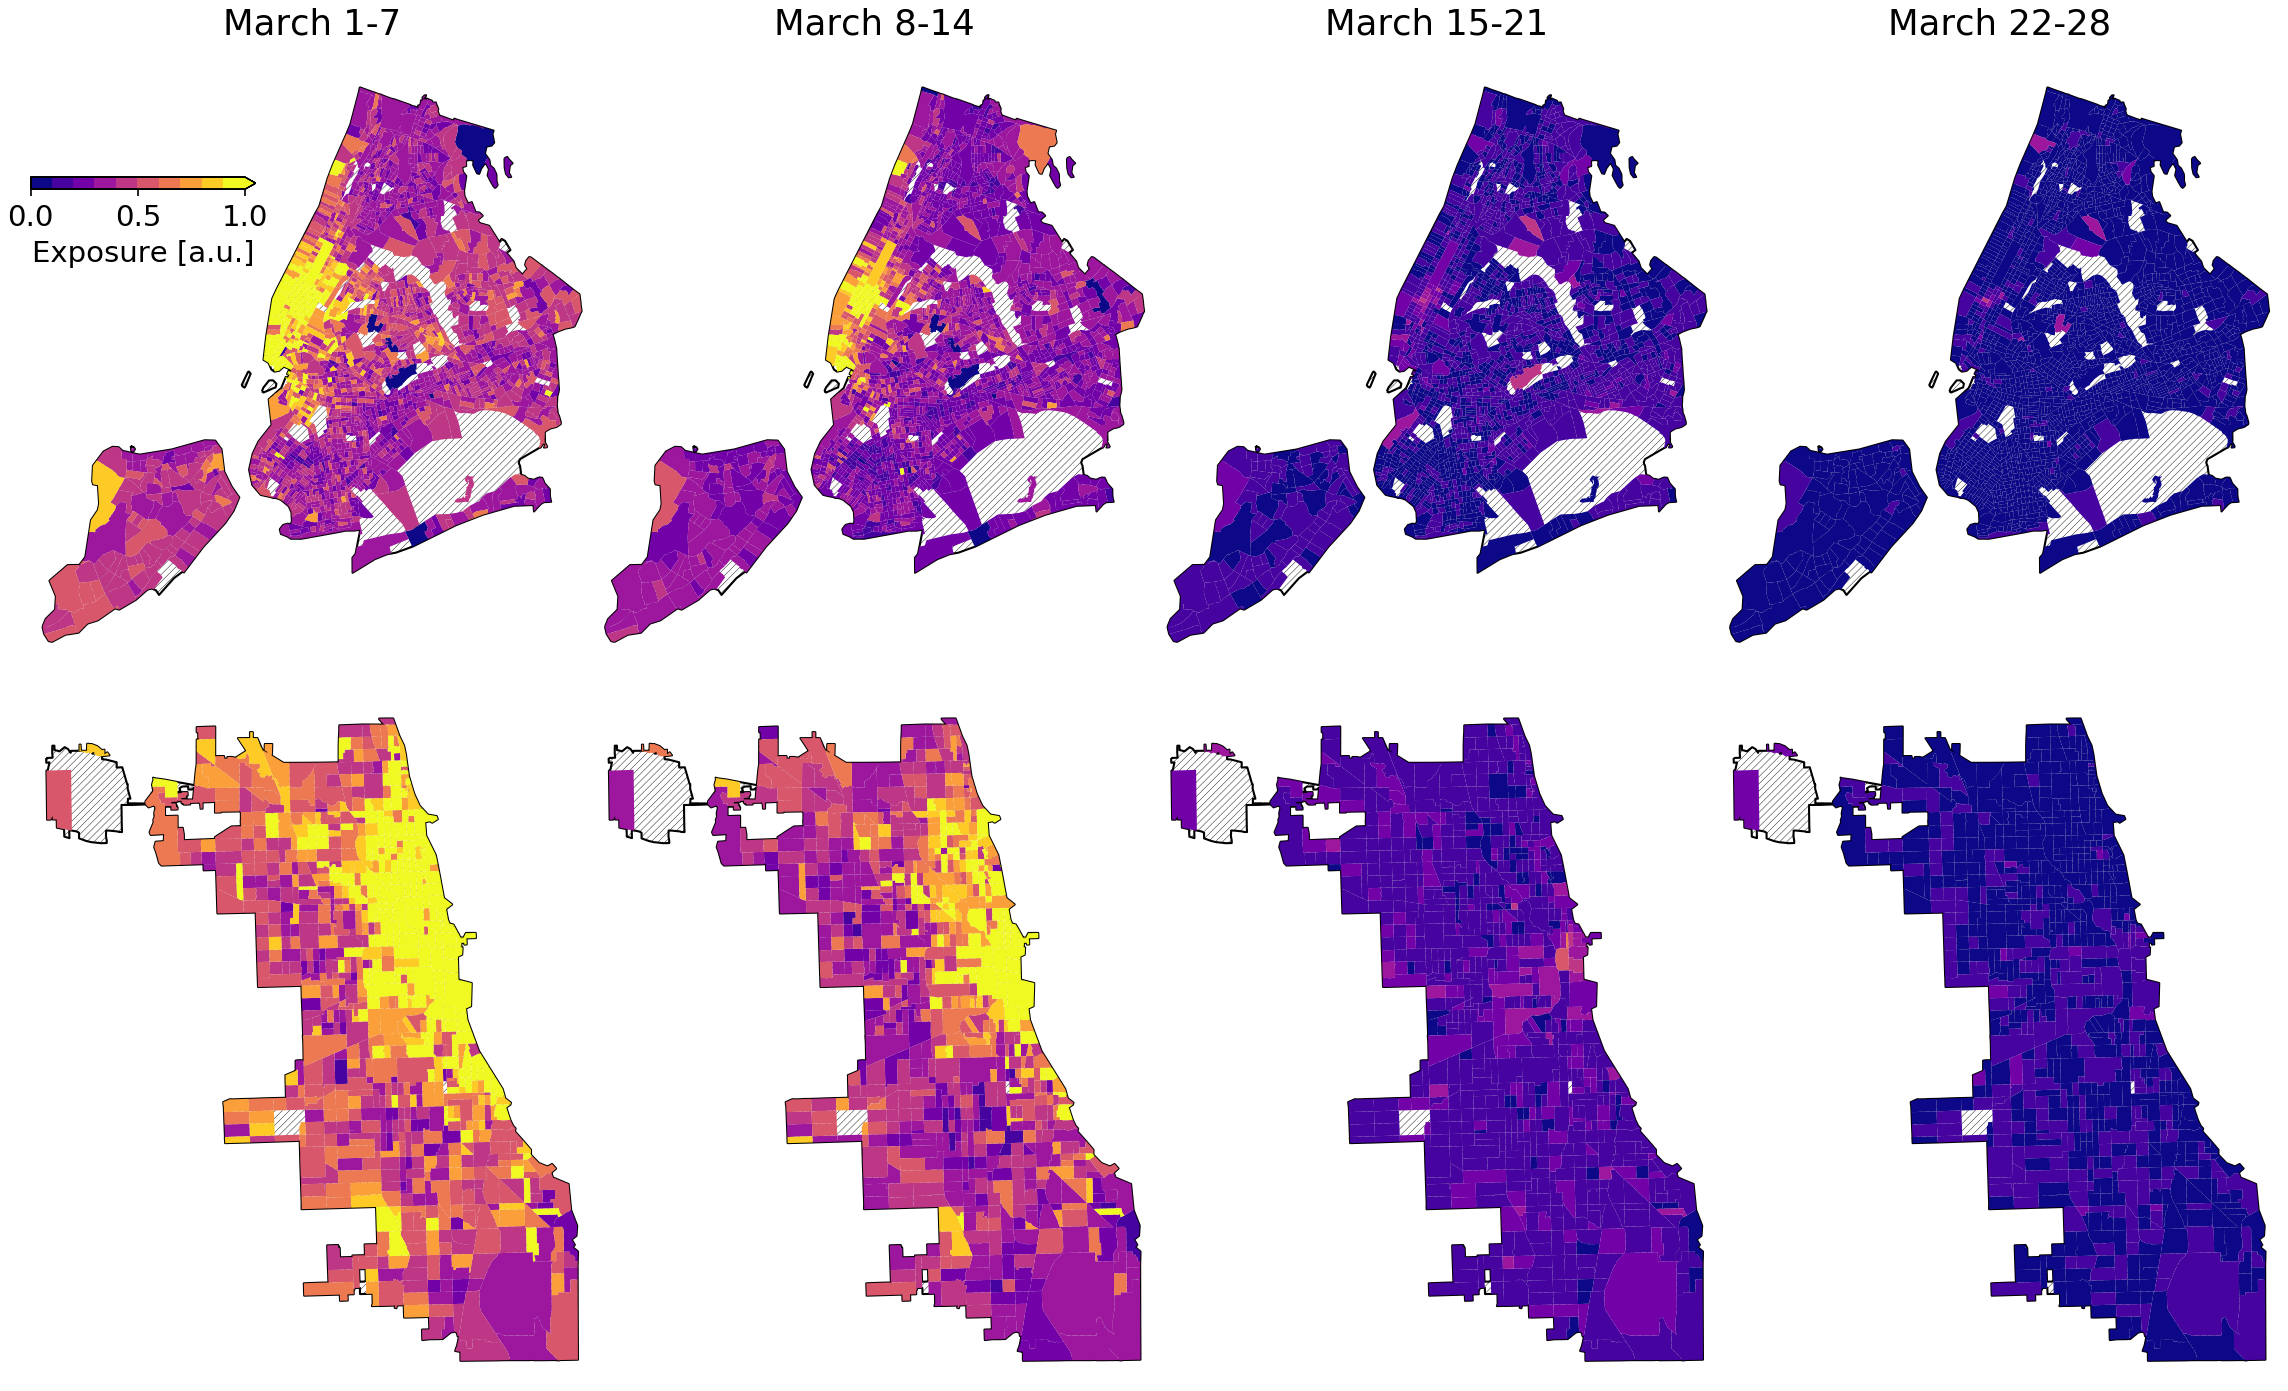 Neighborhood-level activity out of home in New York City and Chicago, by week.